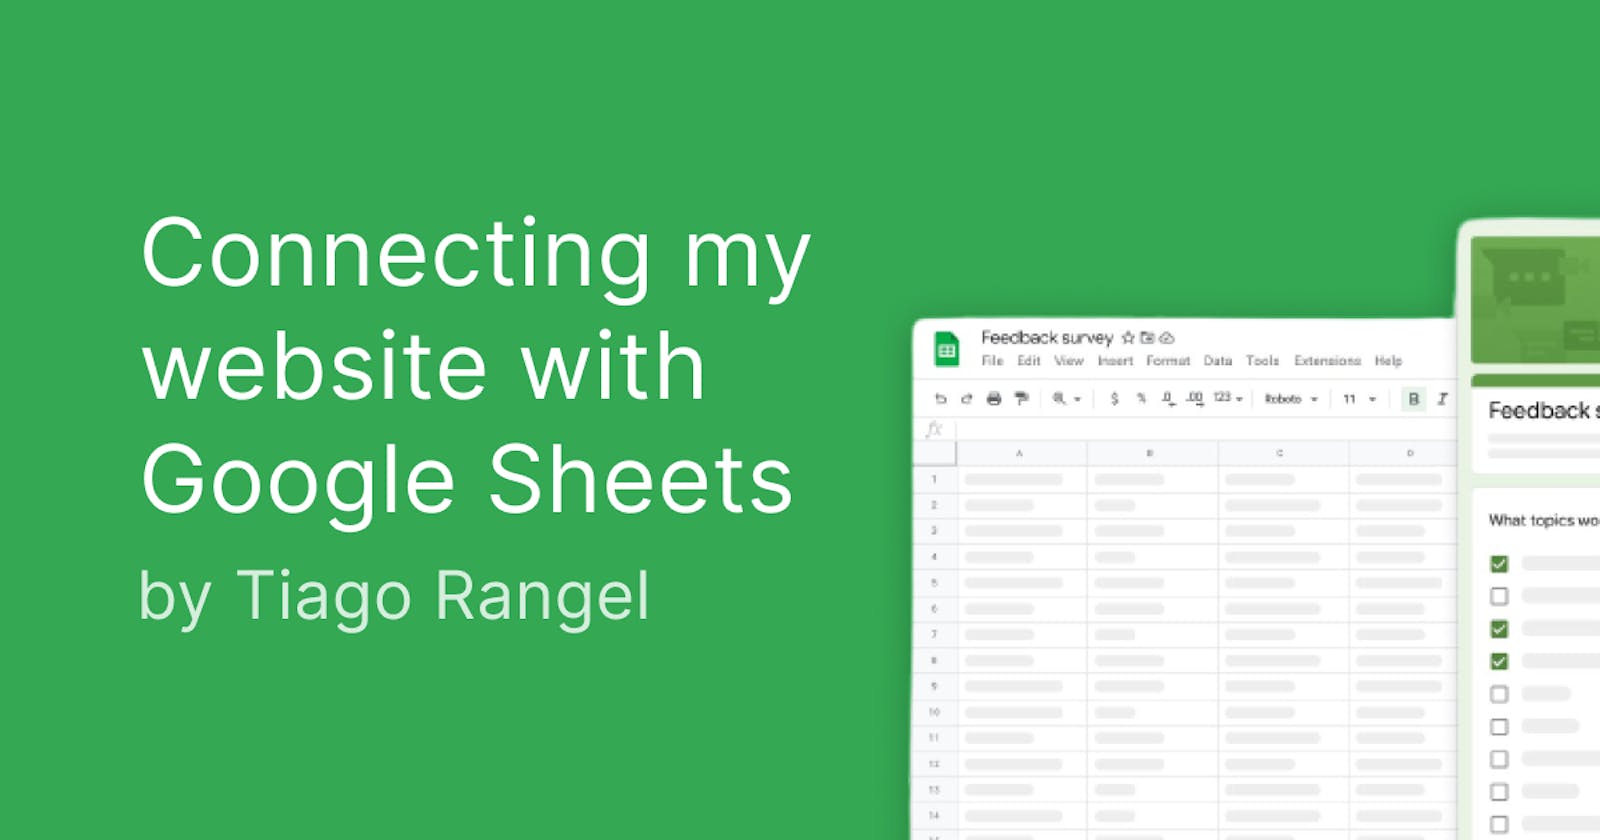 Connecting my website with Google Sheets